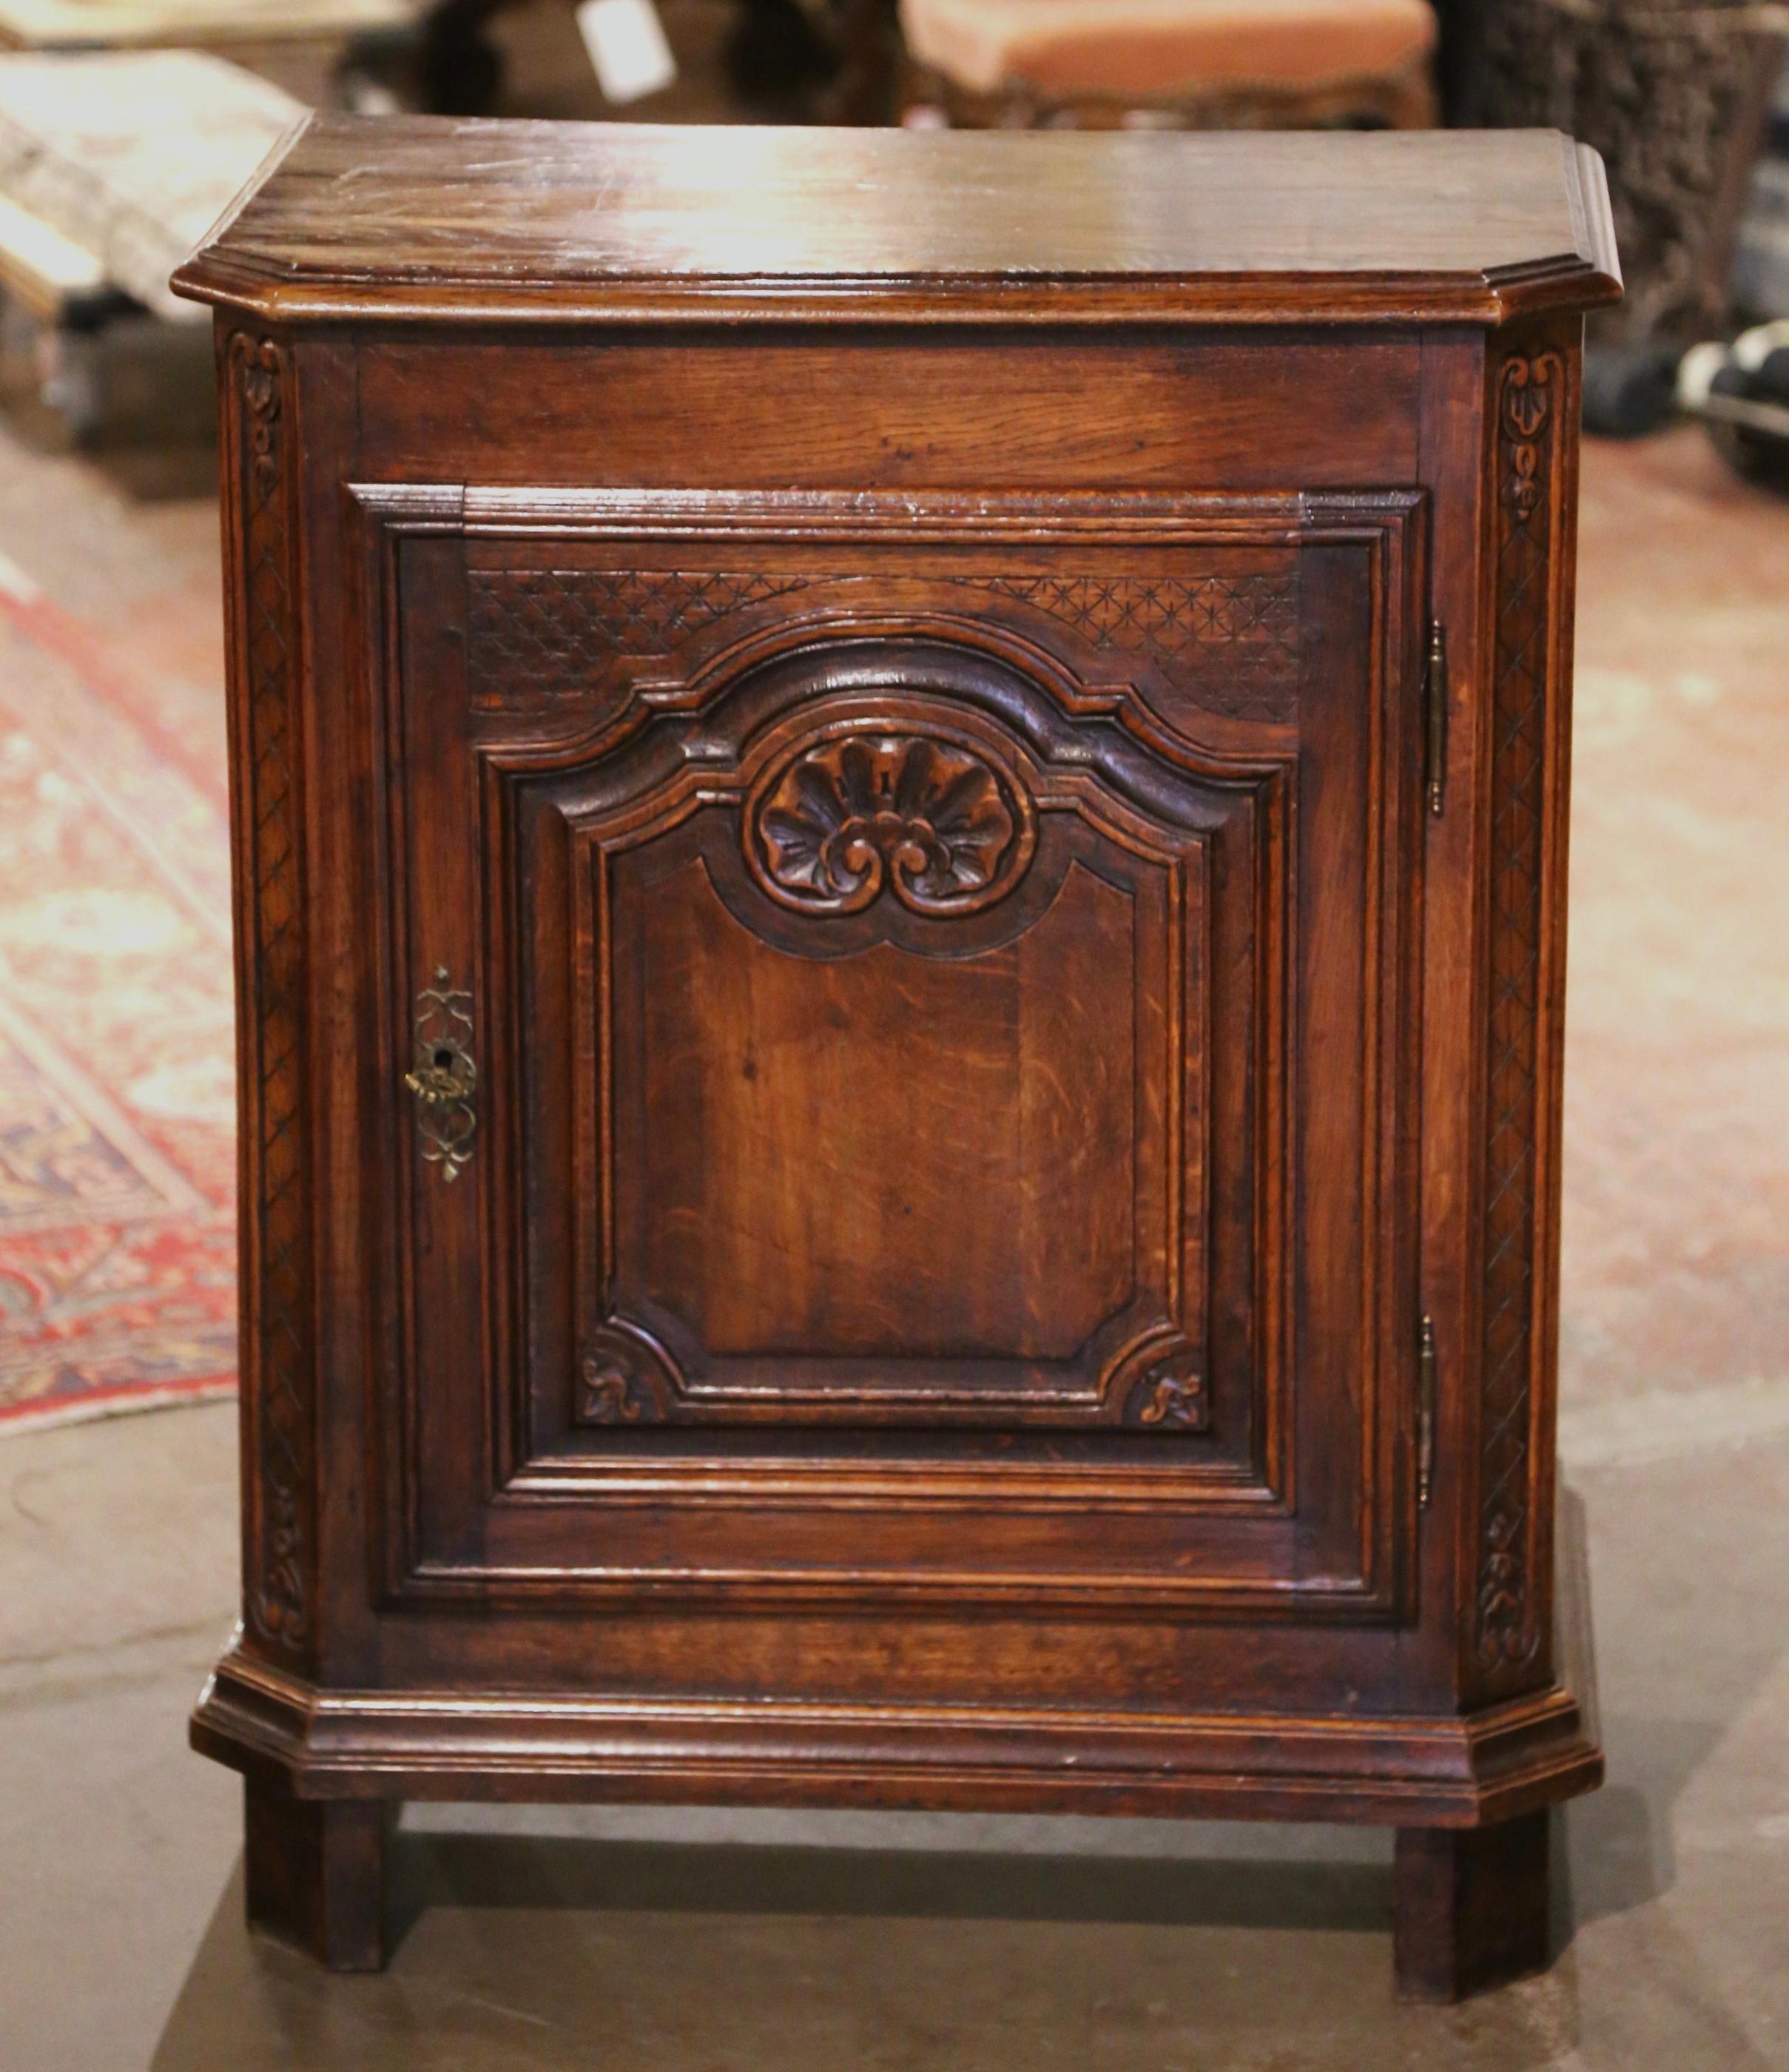 This elegant antique oak “Confiturier” (French for jelly cabinet) was crafted in Normandy, circa 1920. The provincial cabinet stands on square feet over a straight bottom plinth; it is fitted with a single door decorated with carved raised and